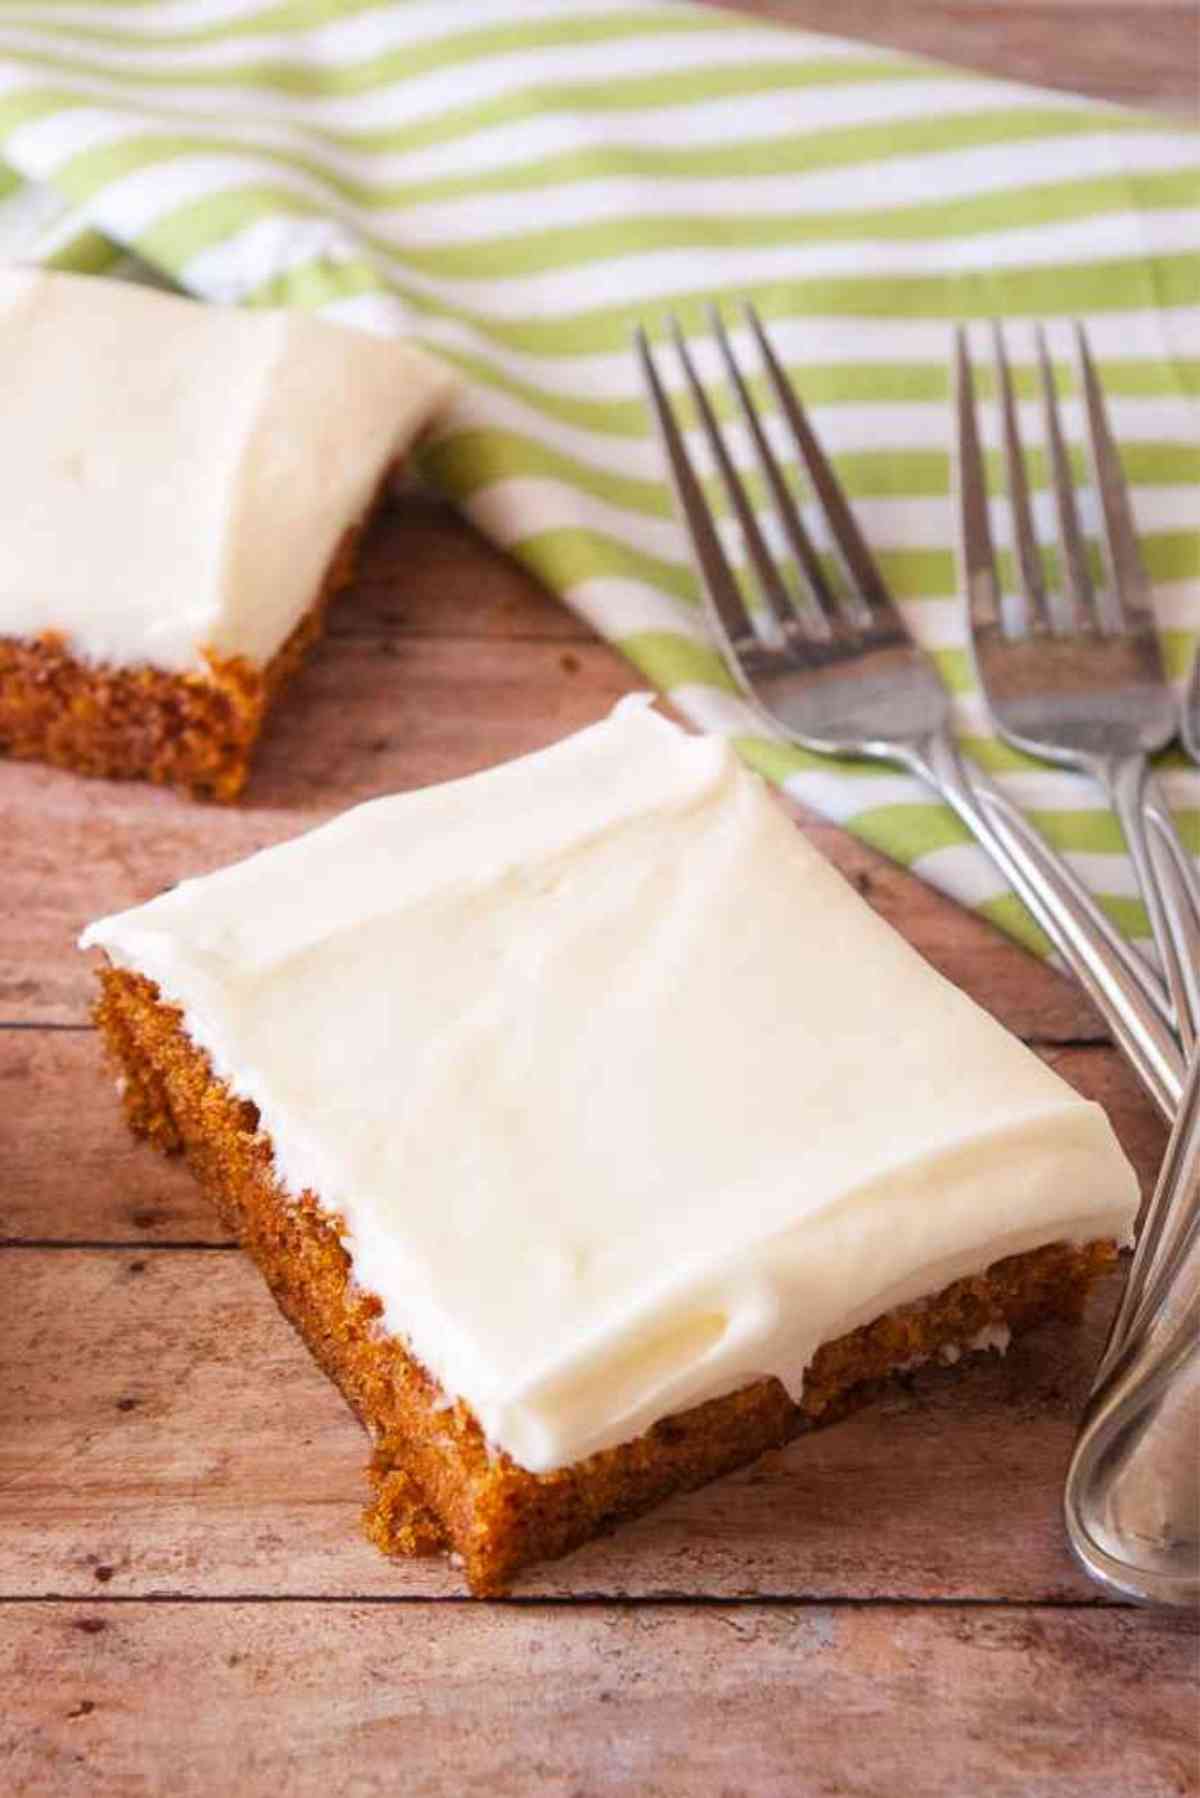 A slice of carrot sheet cake frosted with cream cheese frosting next to two forks.